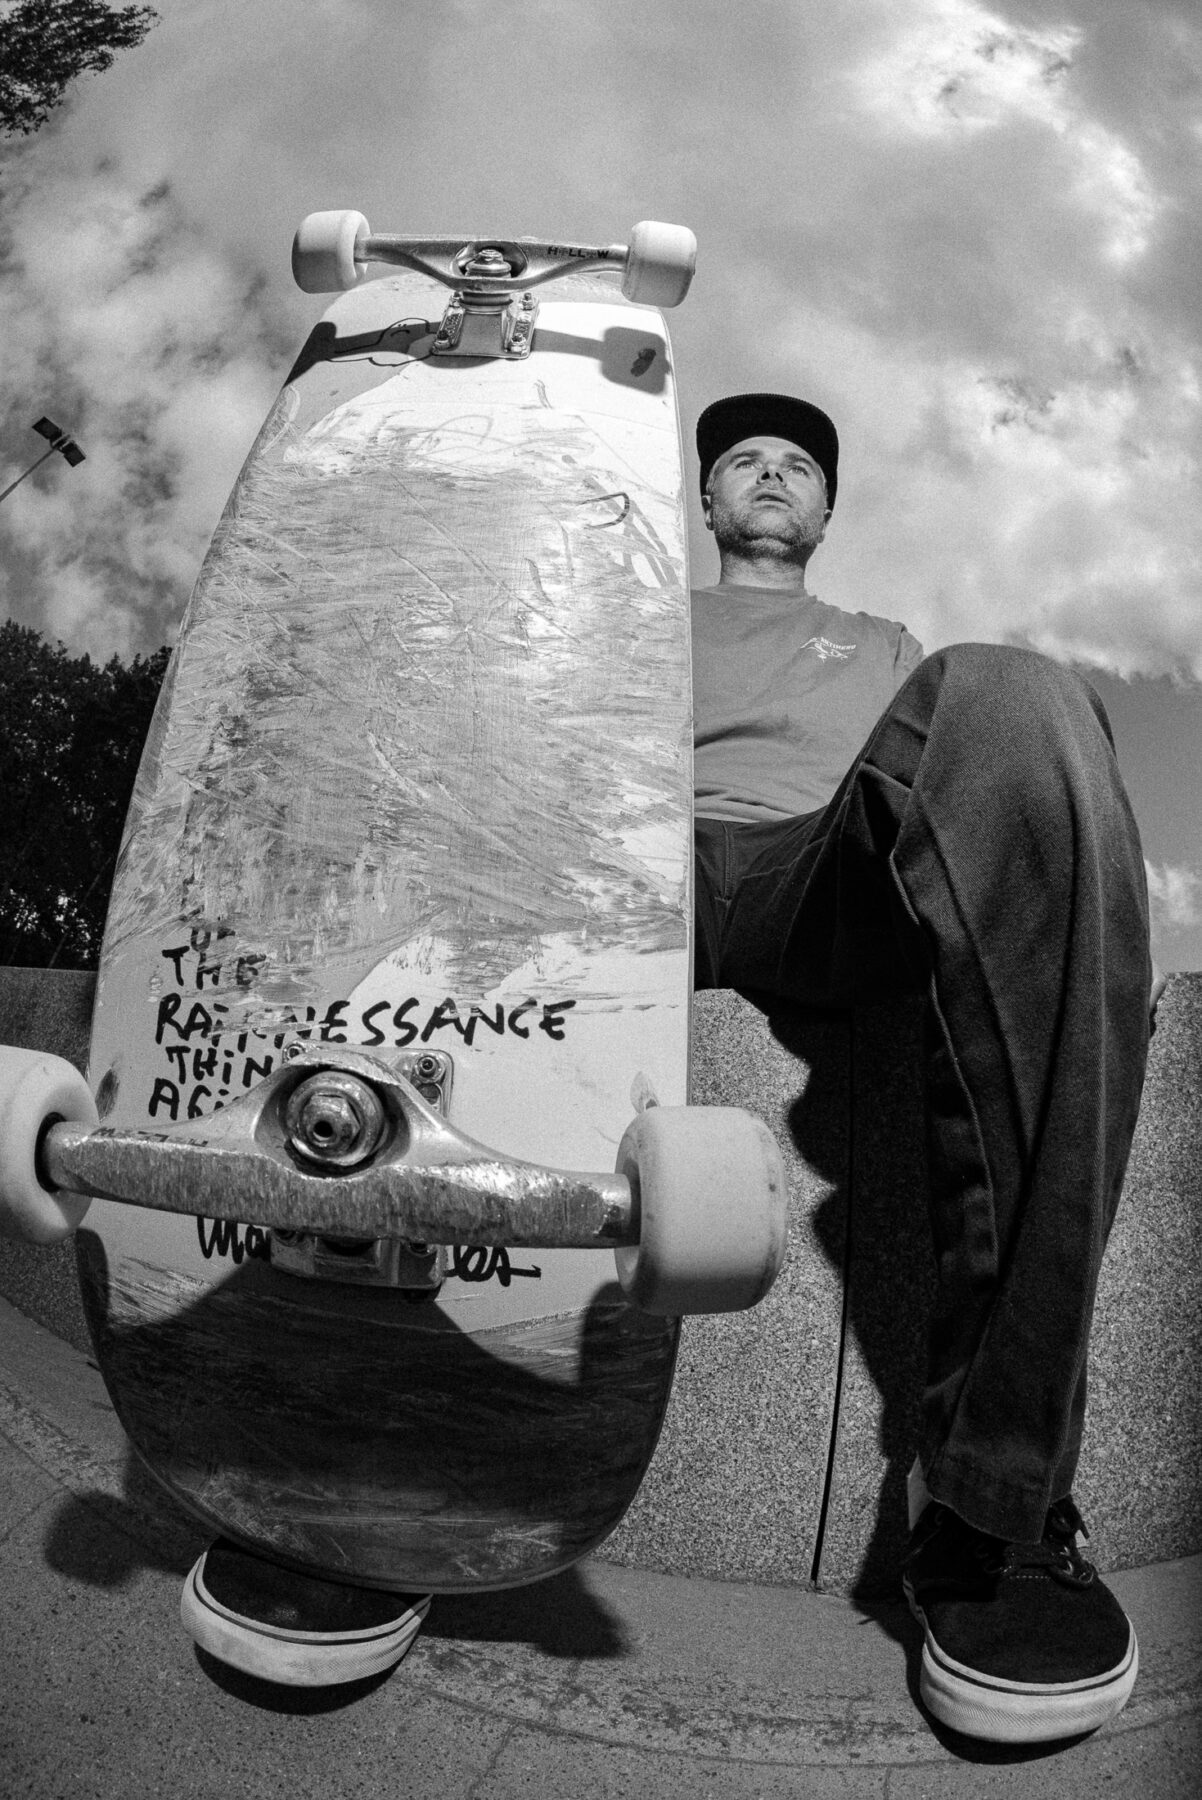 A fisheye photo of a person sitting with a skateboard in front focus.